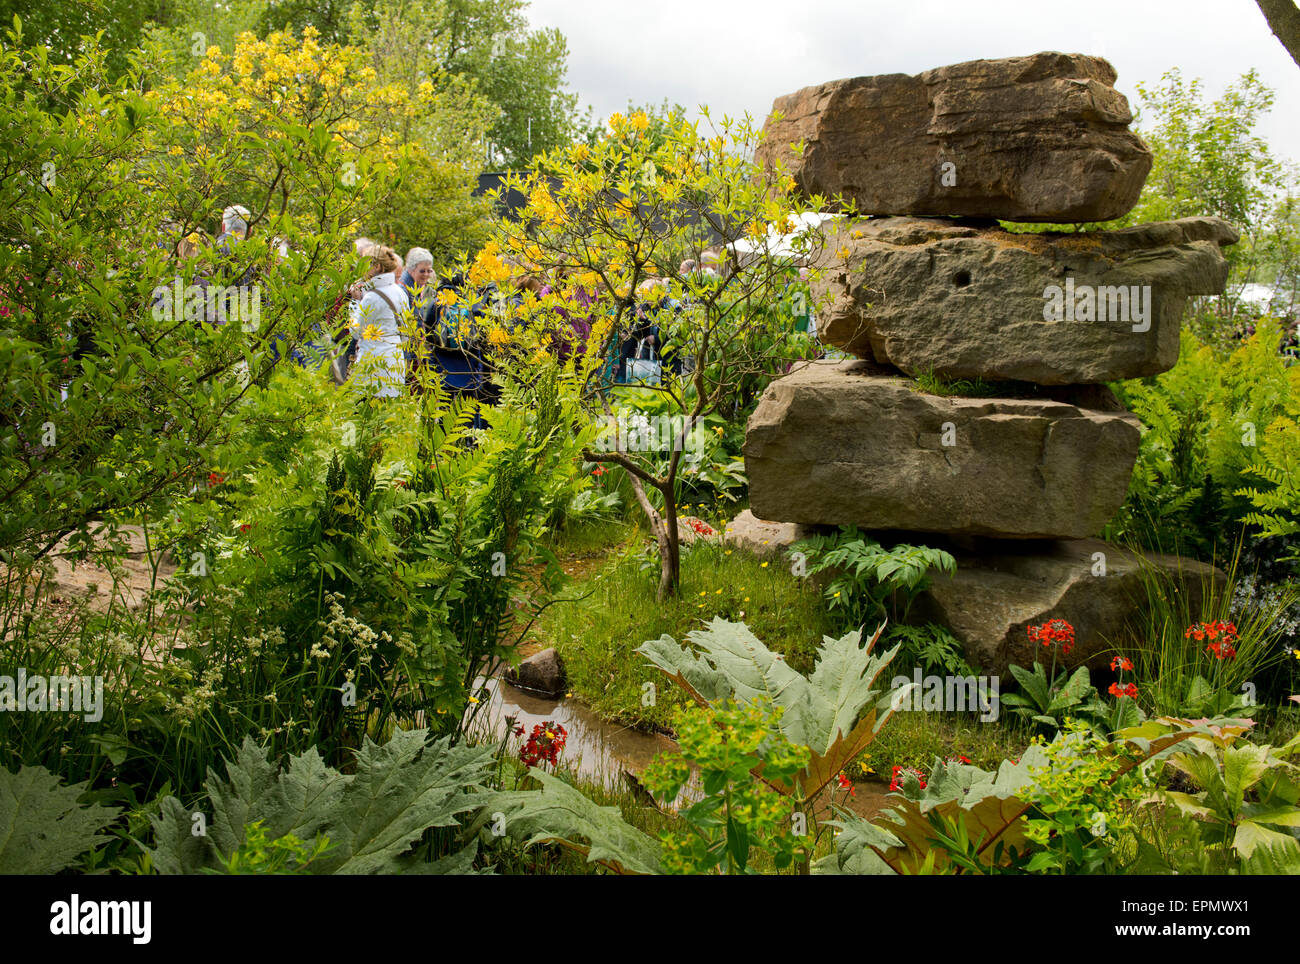 London, UK May, 19, 2015 The Laurent Perrier Chatswoth Garden, winner of the best show garden award, desiged by Dan Pearson at The RHS Chelsea Flower Show Stock Photo